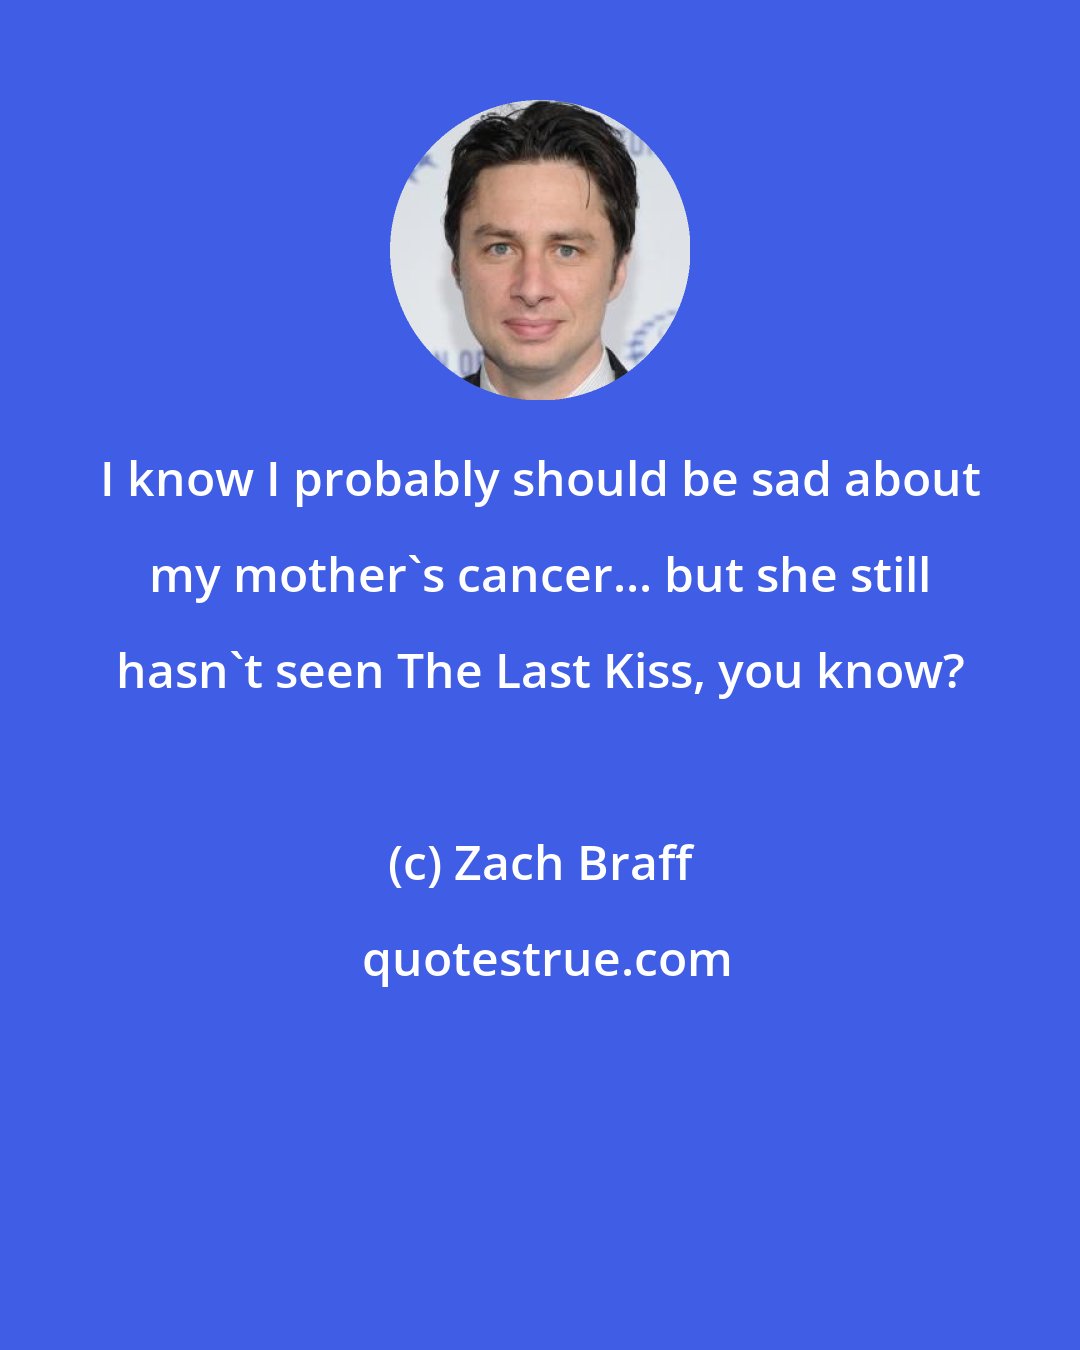 Zach Braff: I know I probably should be sad about my mother's cancer... but she still hasn't seen The Last Kiss, you know?